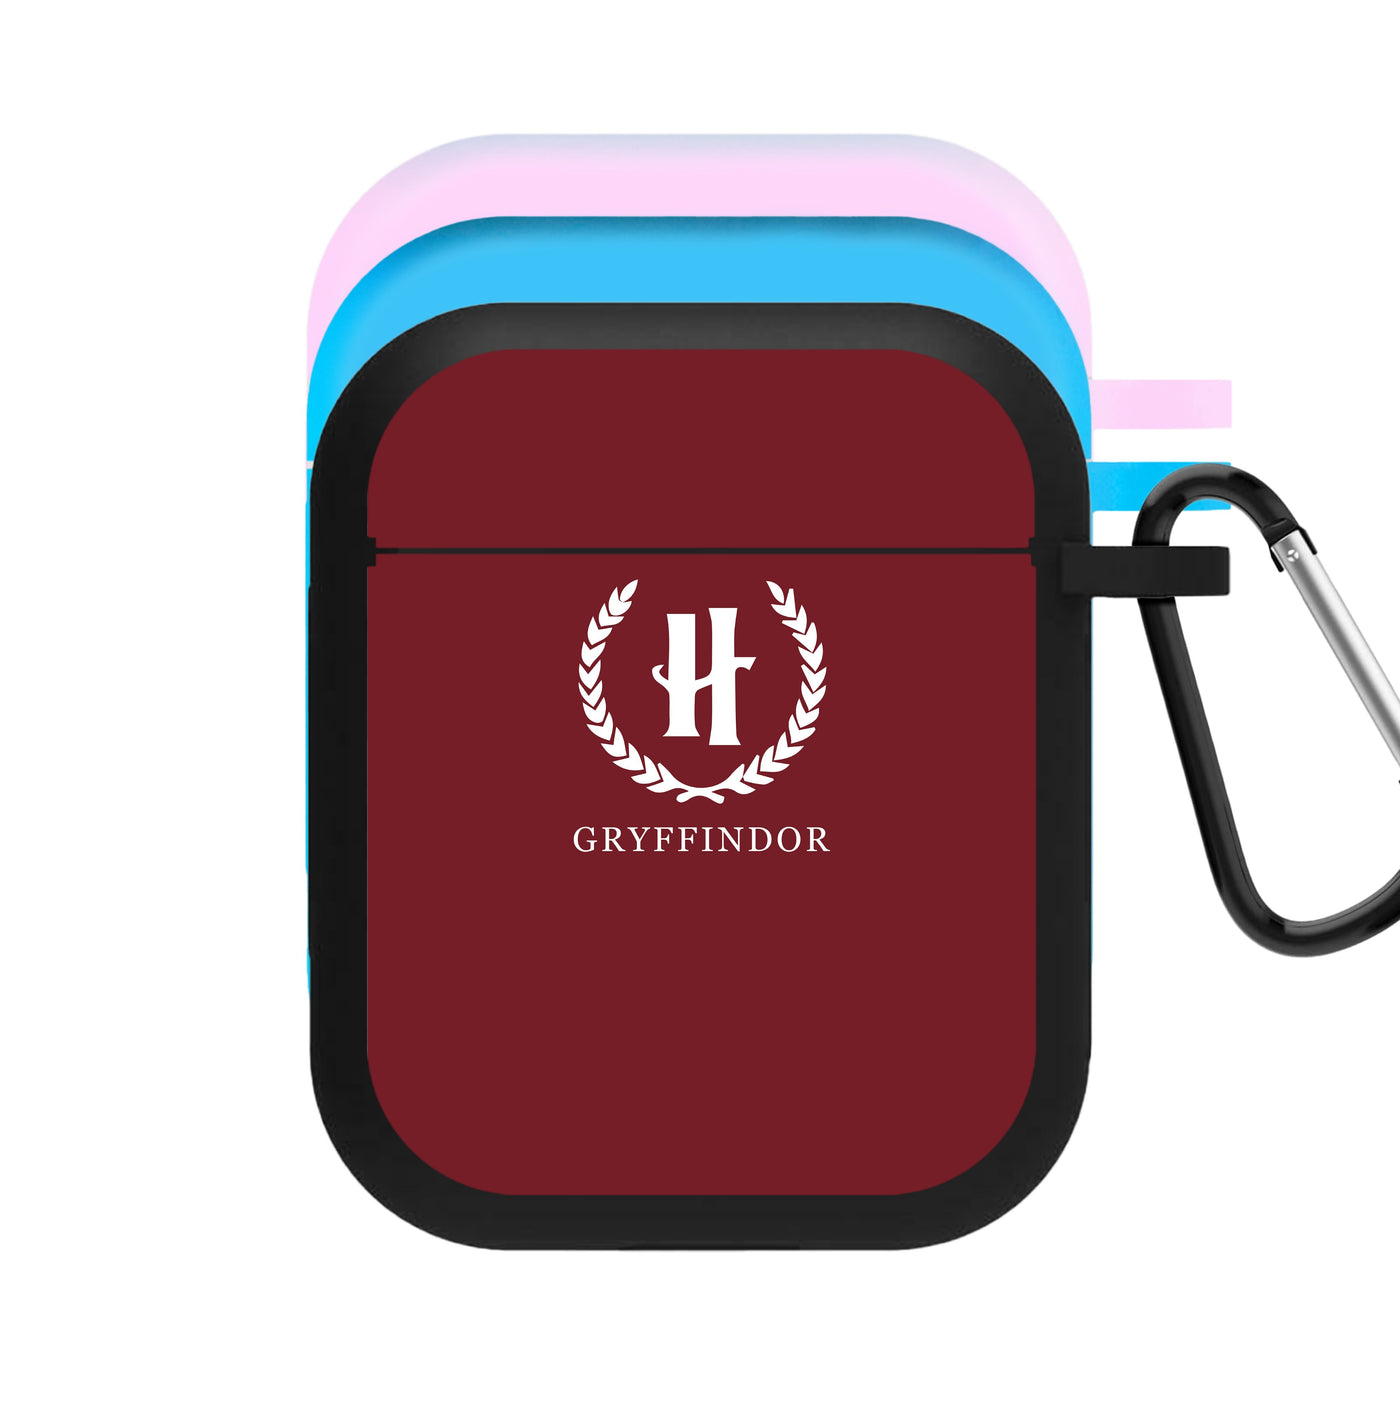 Gryffindor - Harry Potter AirPods Case